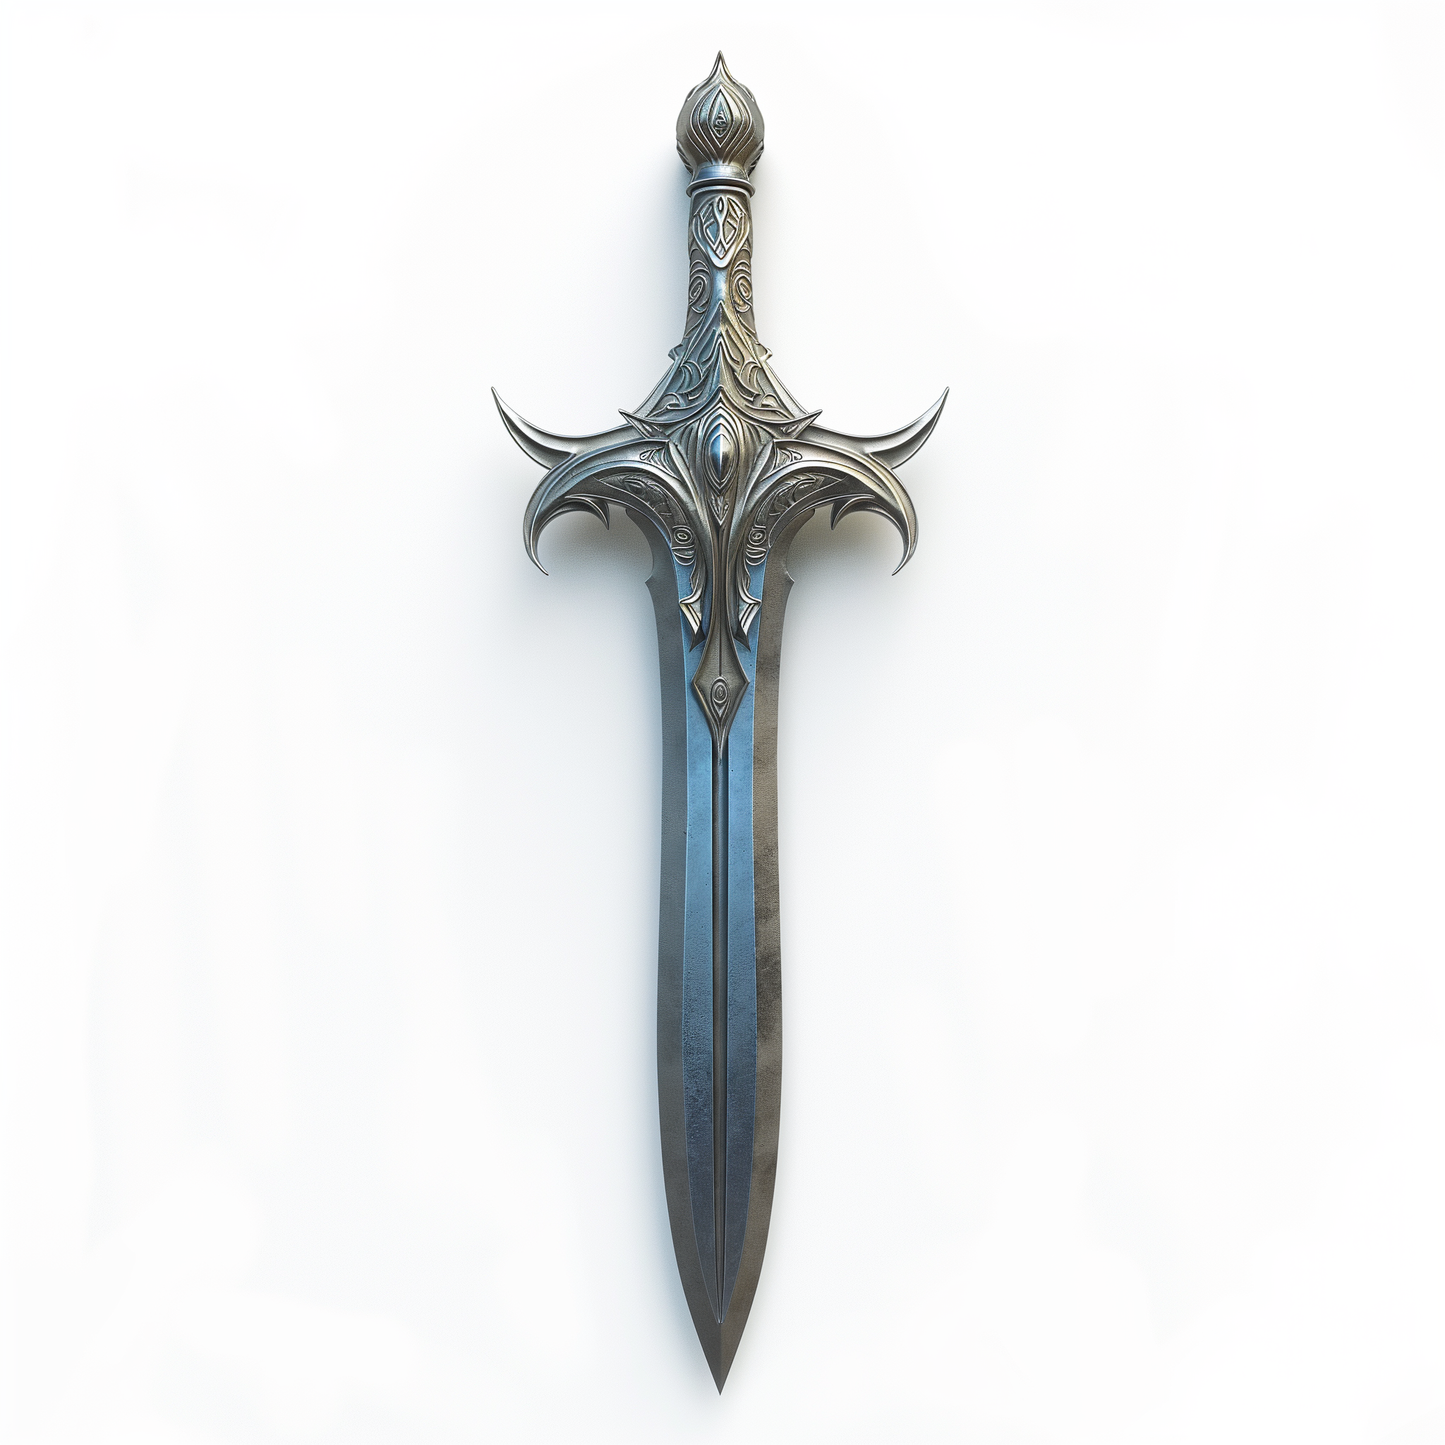 The Enchanted Dagger of Elven Springs